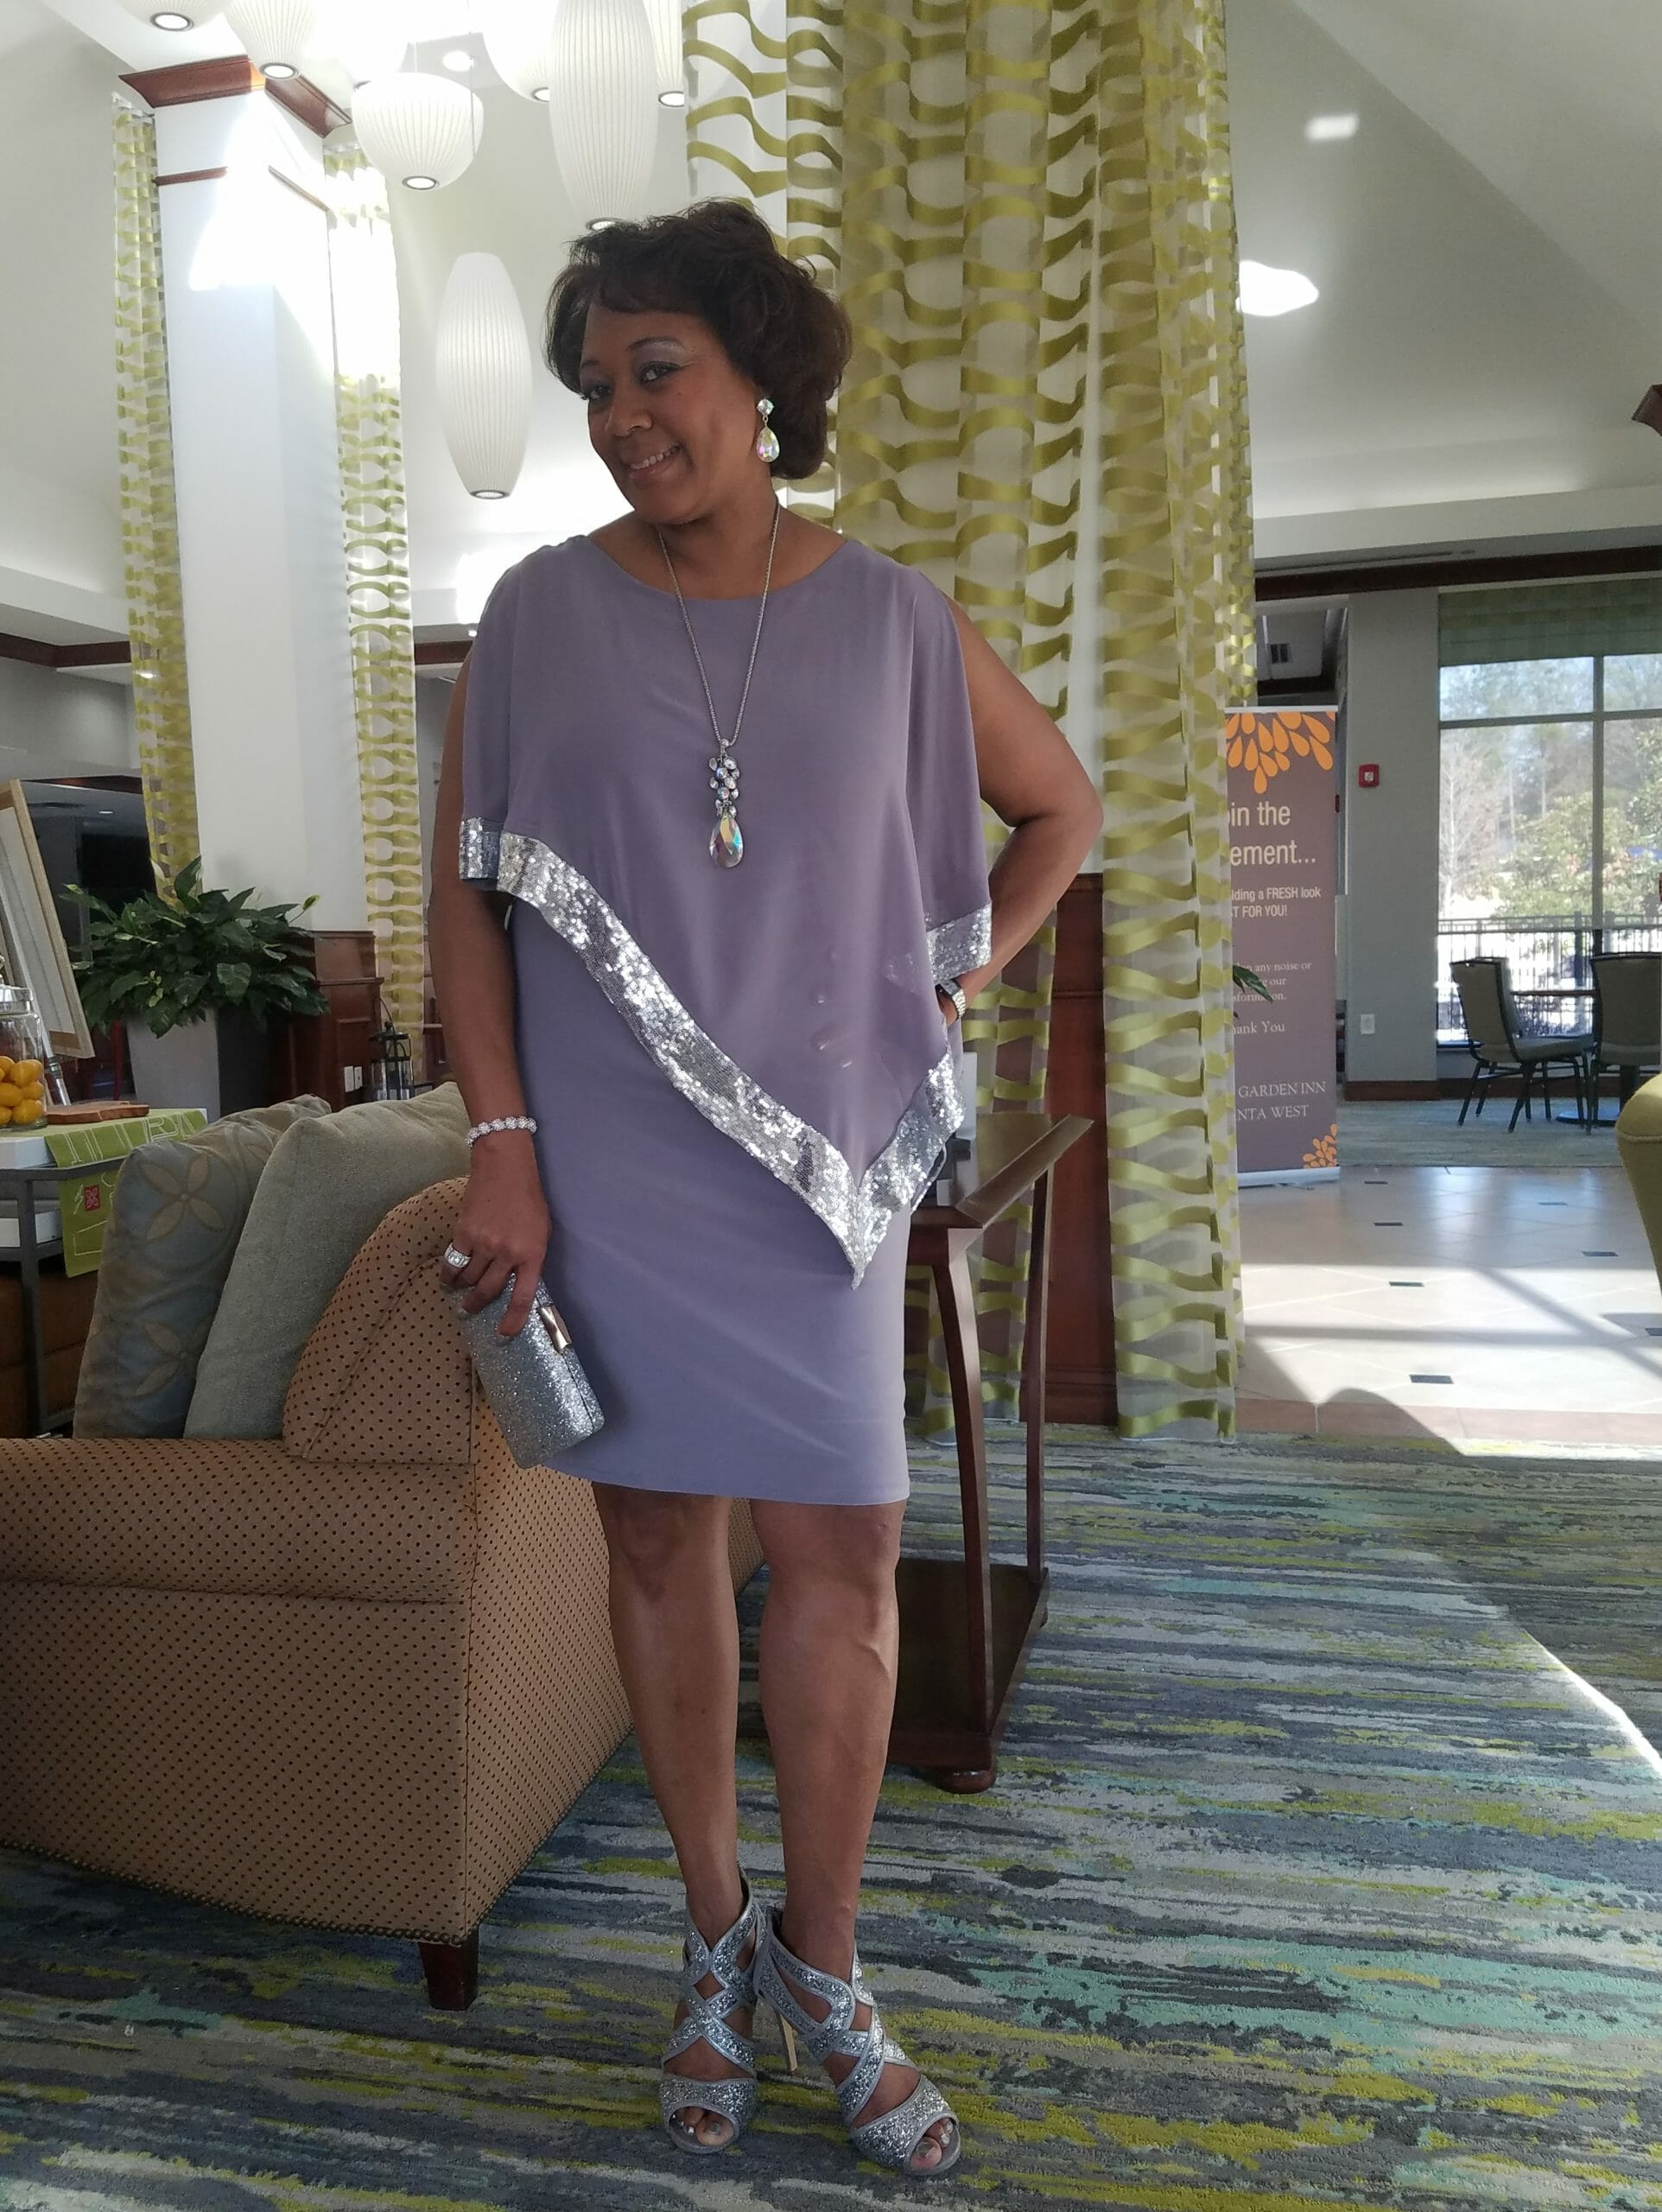 A smiling Midnight Velvet customer, in a lavender dress with silver trim on the cape-like top, and silver heeled sandals.